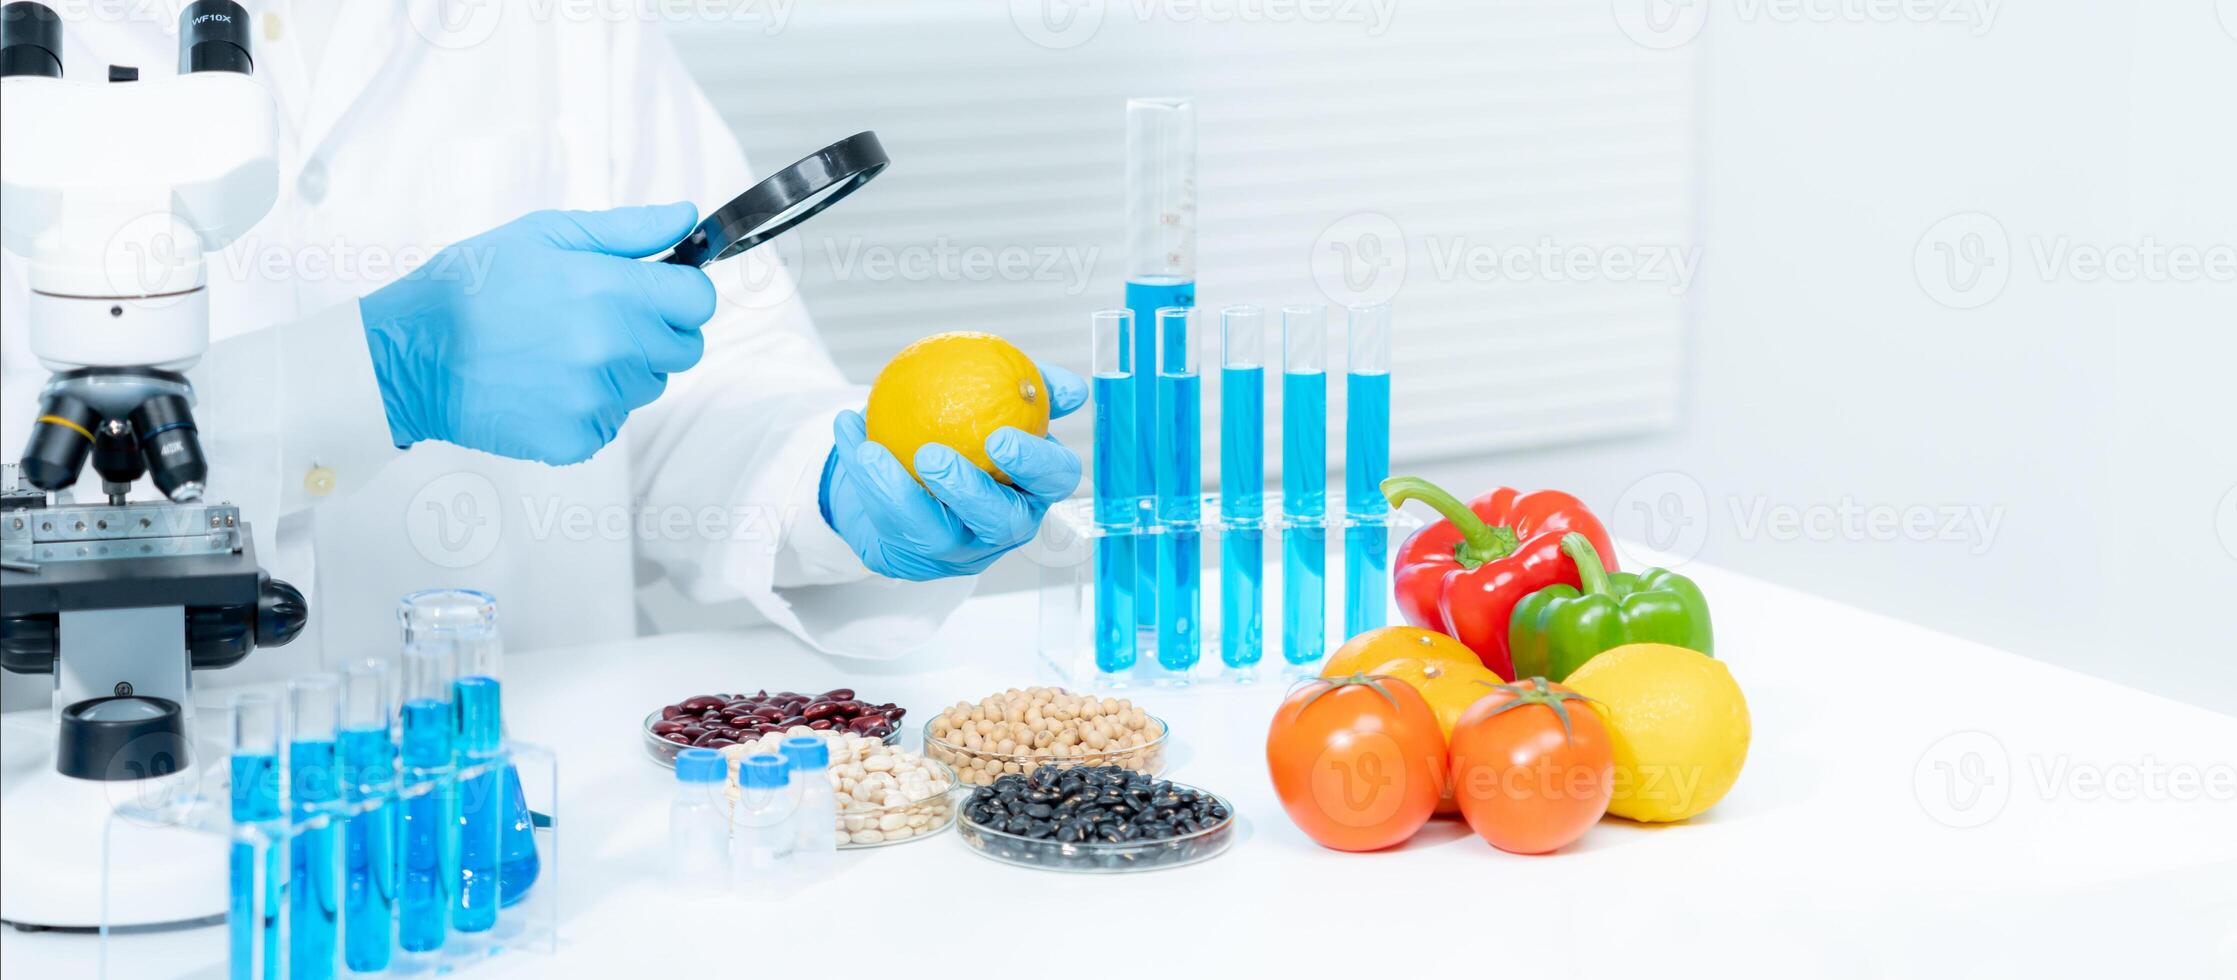 Scientist check chemical food residues in laboratory. Control experts inspect quality of fruits, vegetables. lab, hazards, ROHs, find prohibited substances, contaminate, Microscope, Microbiologist photo